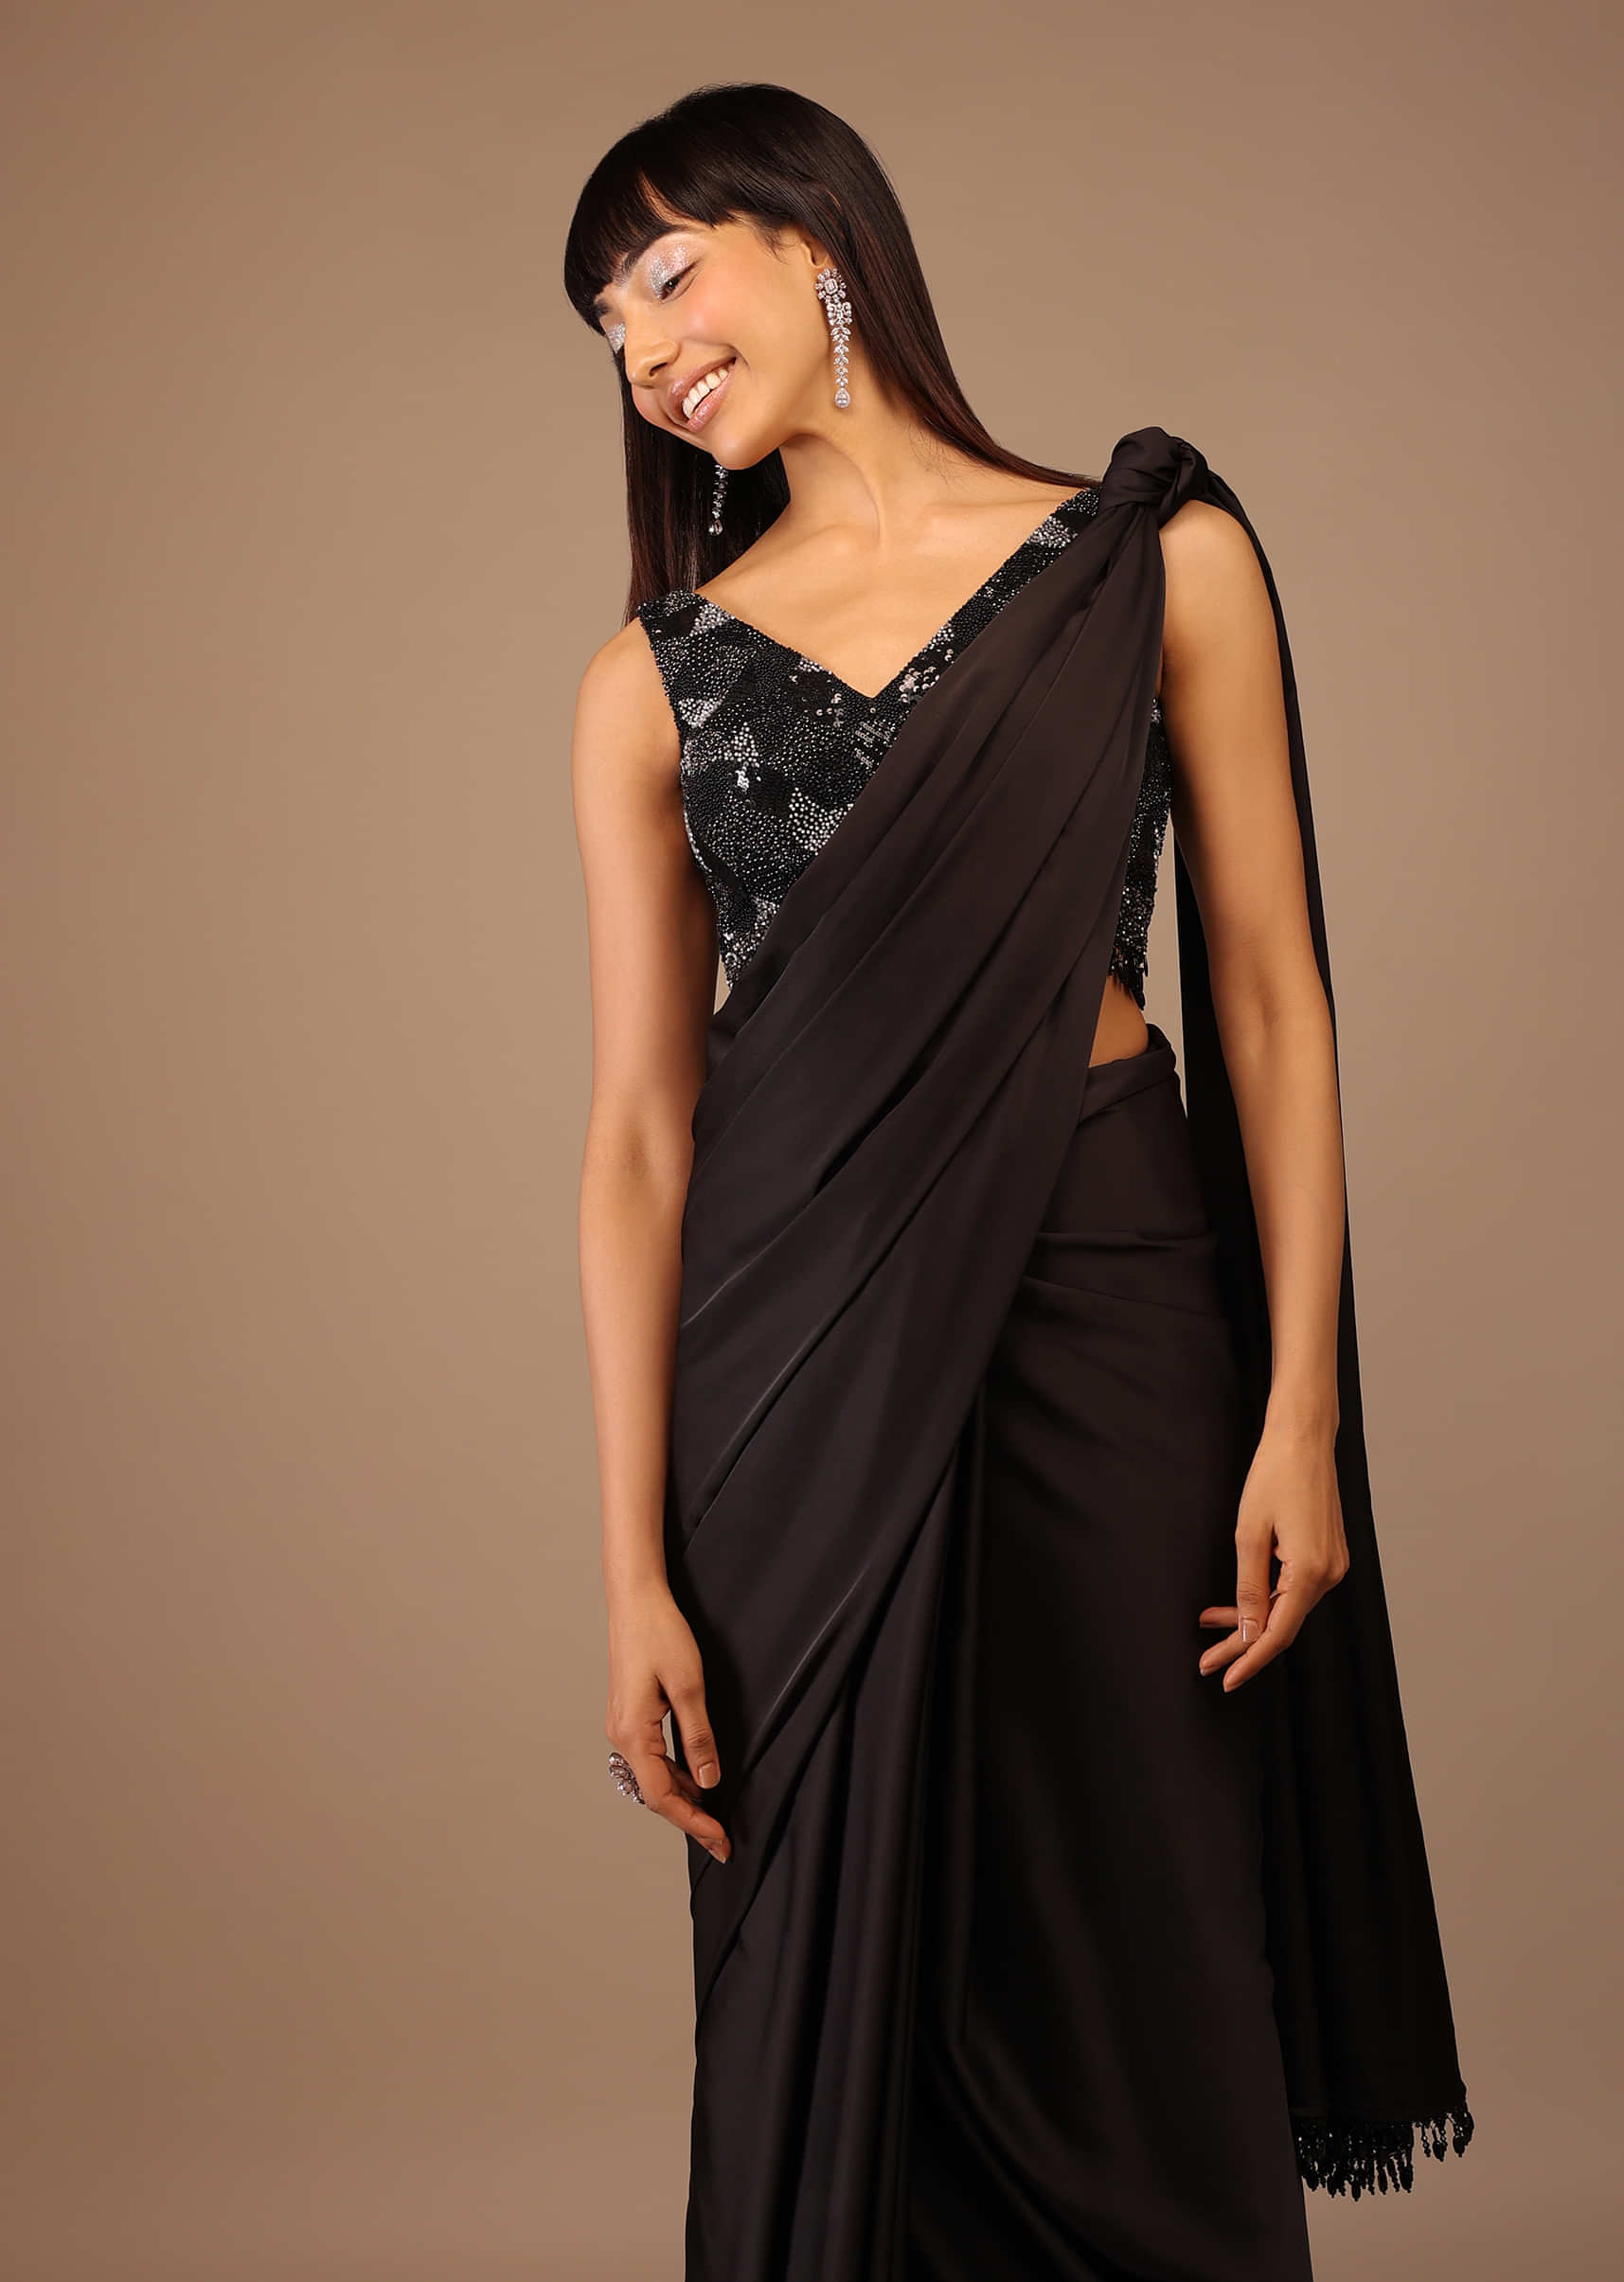 Black Satin Saree With Hand Embroidered Blouse With Fringes On The Hem